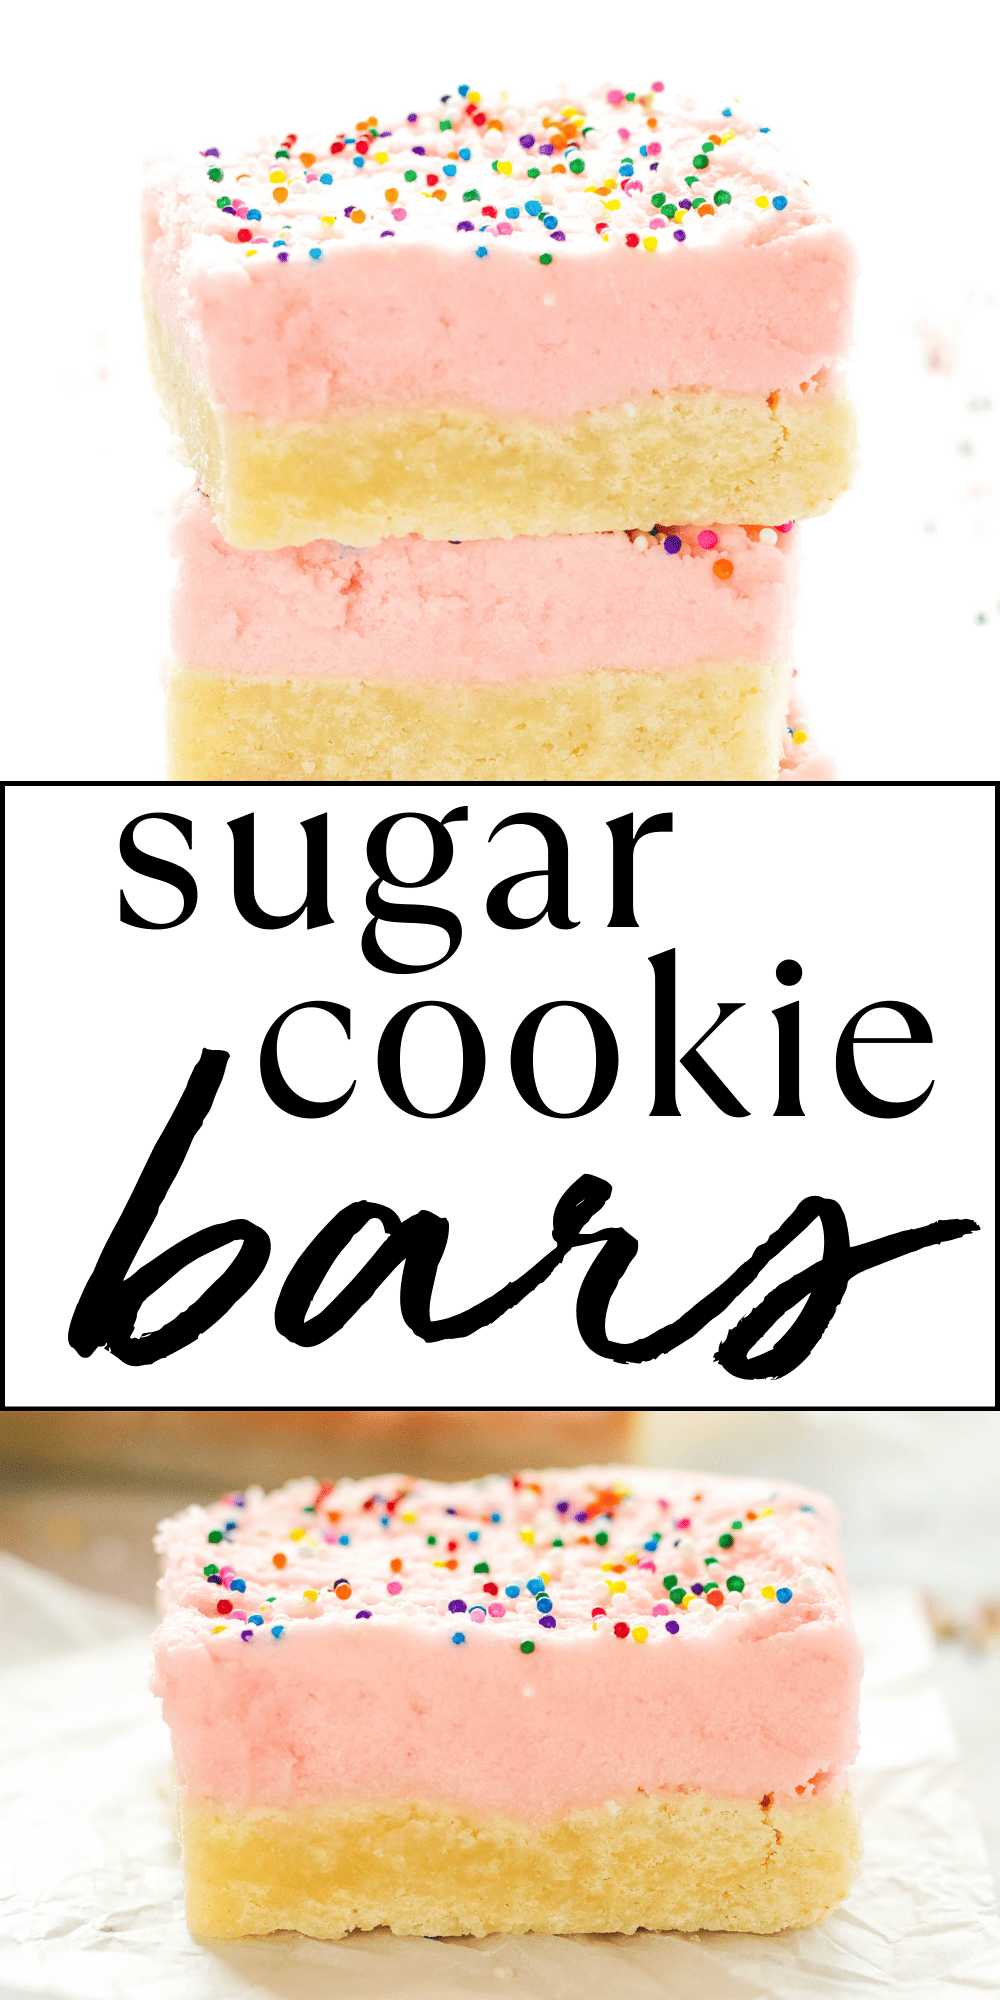 This Sugar Cookie Bars recipe is the perfect sweet treat made with a soft and chewy sugar cookie base, fluffy frosting and sprinkles! Recipe from thebusybaker.ca! #sugarcookiebars #sugarcookiebarsrecipe #sugarcookiebar #frostedsugarcookiebars #sweettreat #bakingwithkids #easybaking via @busybakerblog